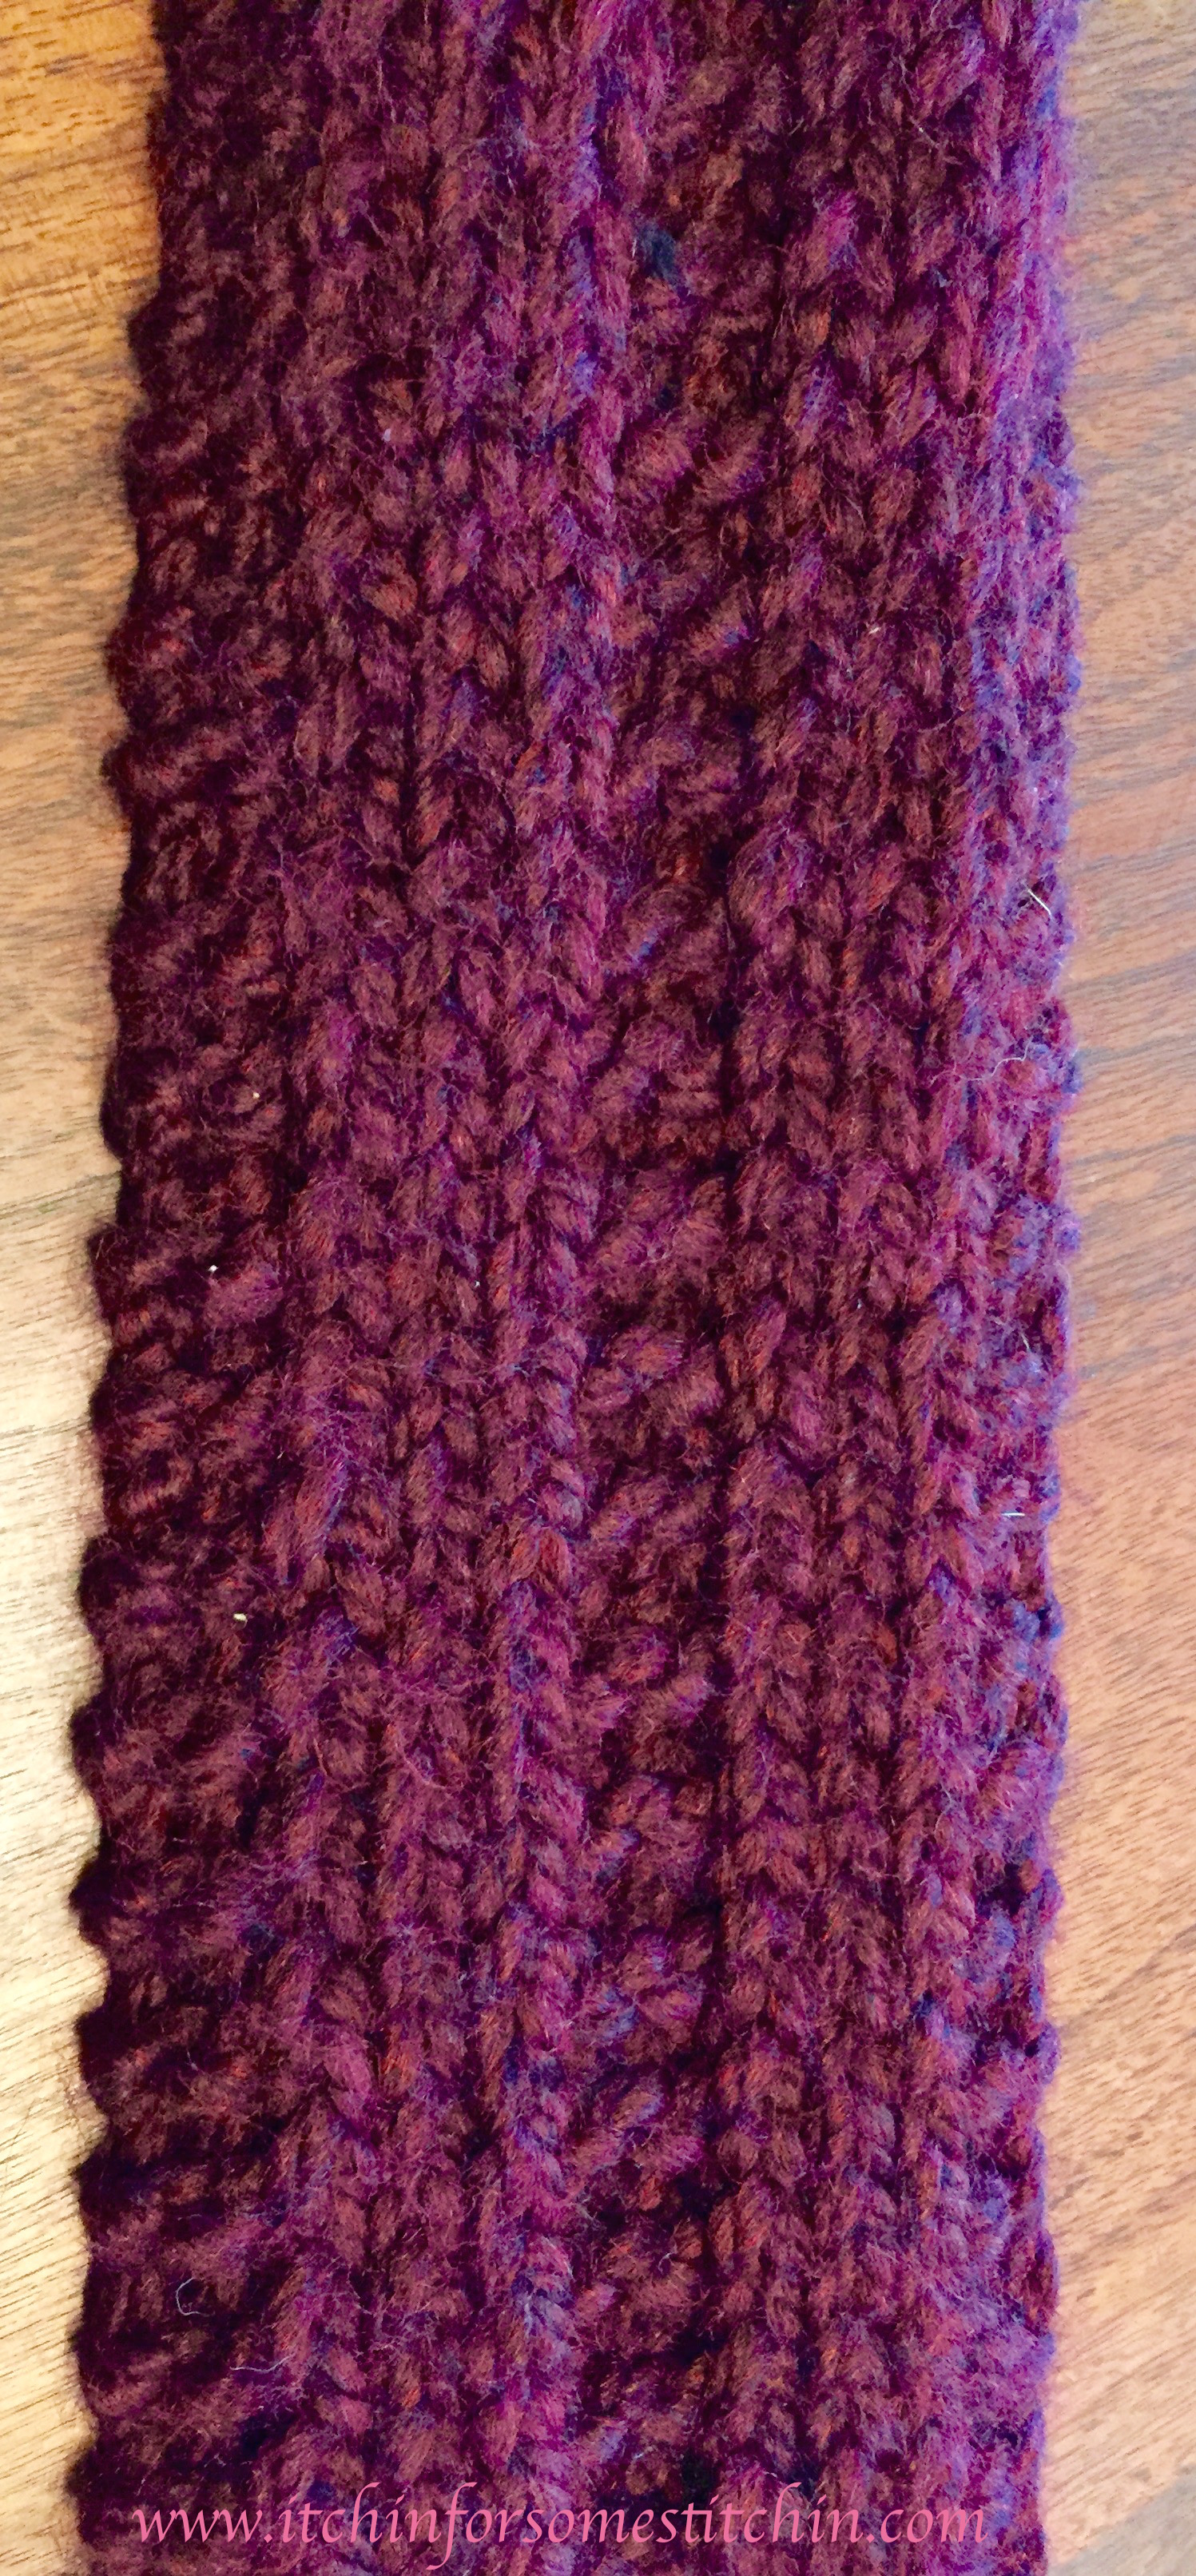 Free Easy Knit Scarf Pattern - Itchin' for some Stitchin'